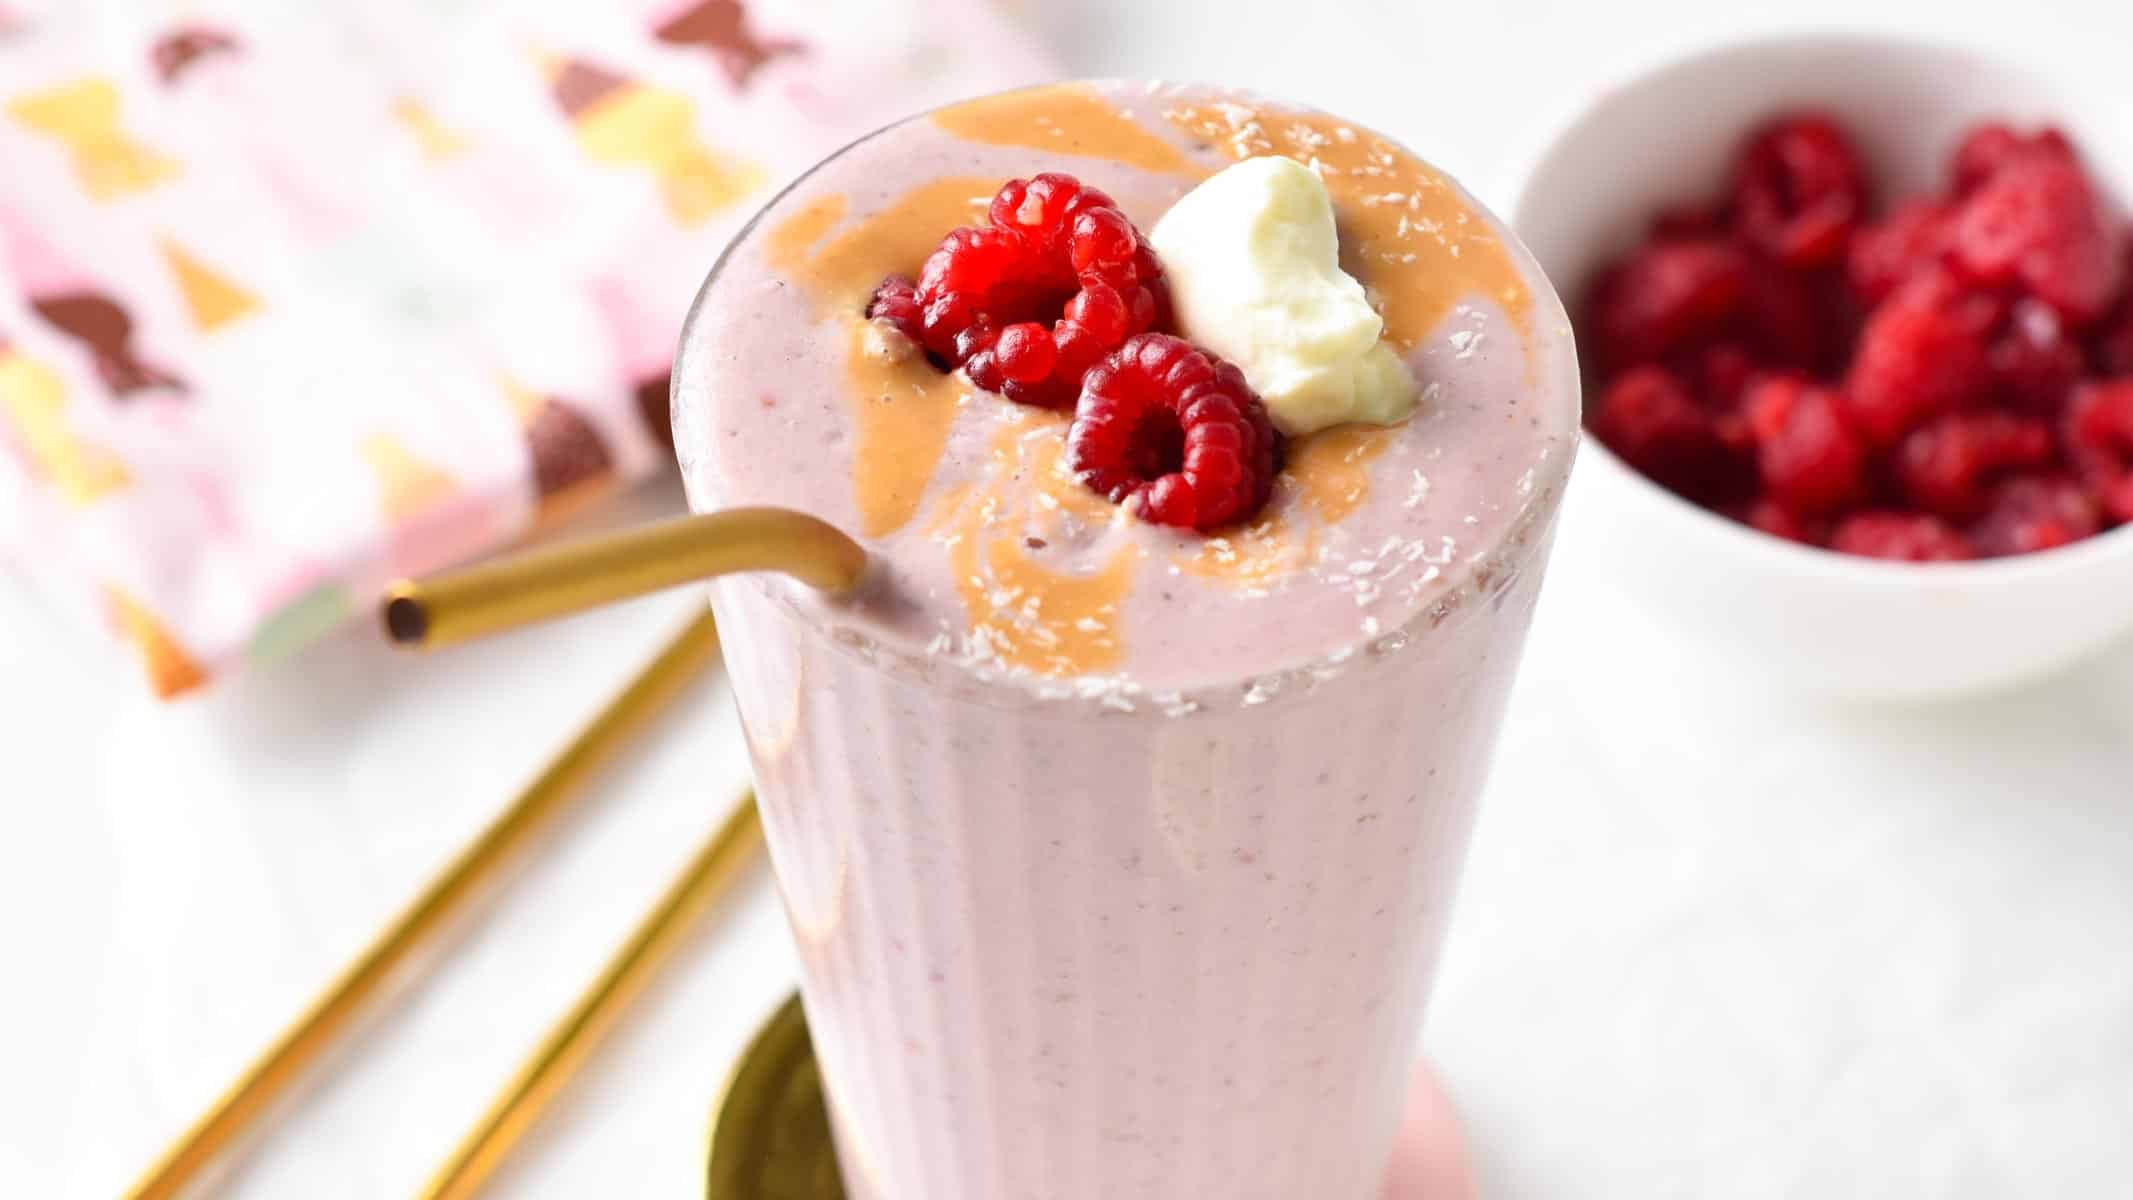 This Greek Yogurt Protein Shake is a deliciously creamy and smooth raspberry protein shake packed with 40 grams of proteins.